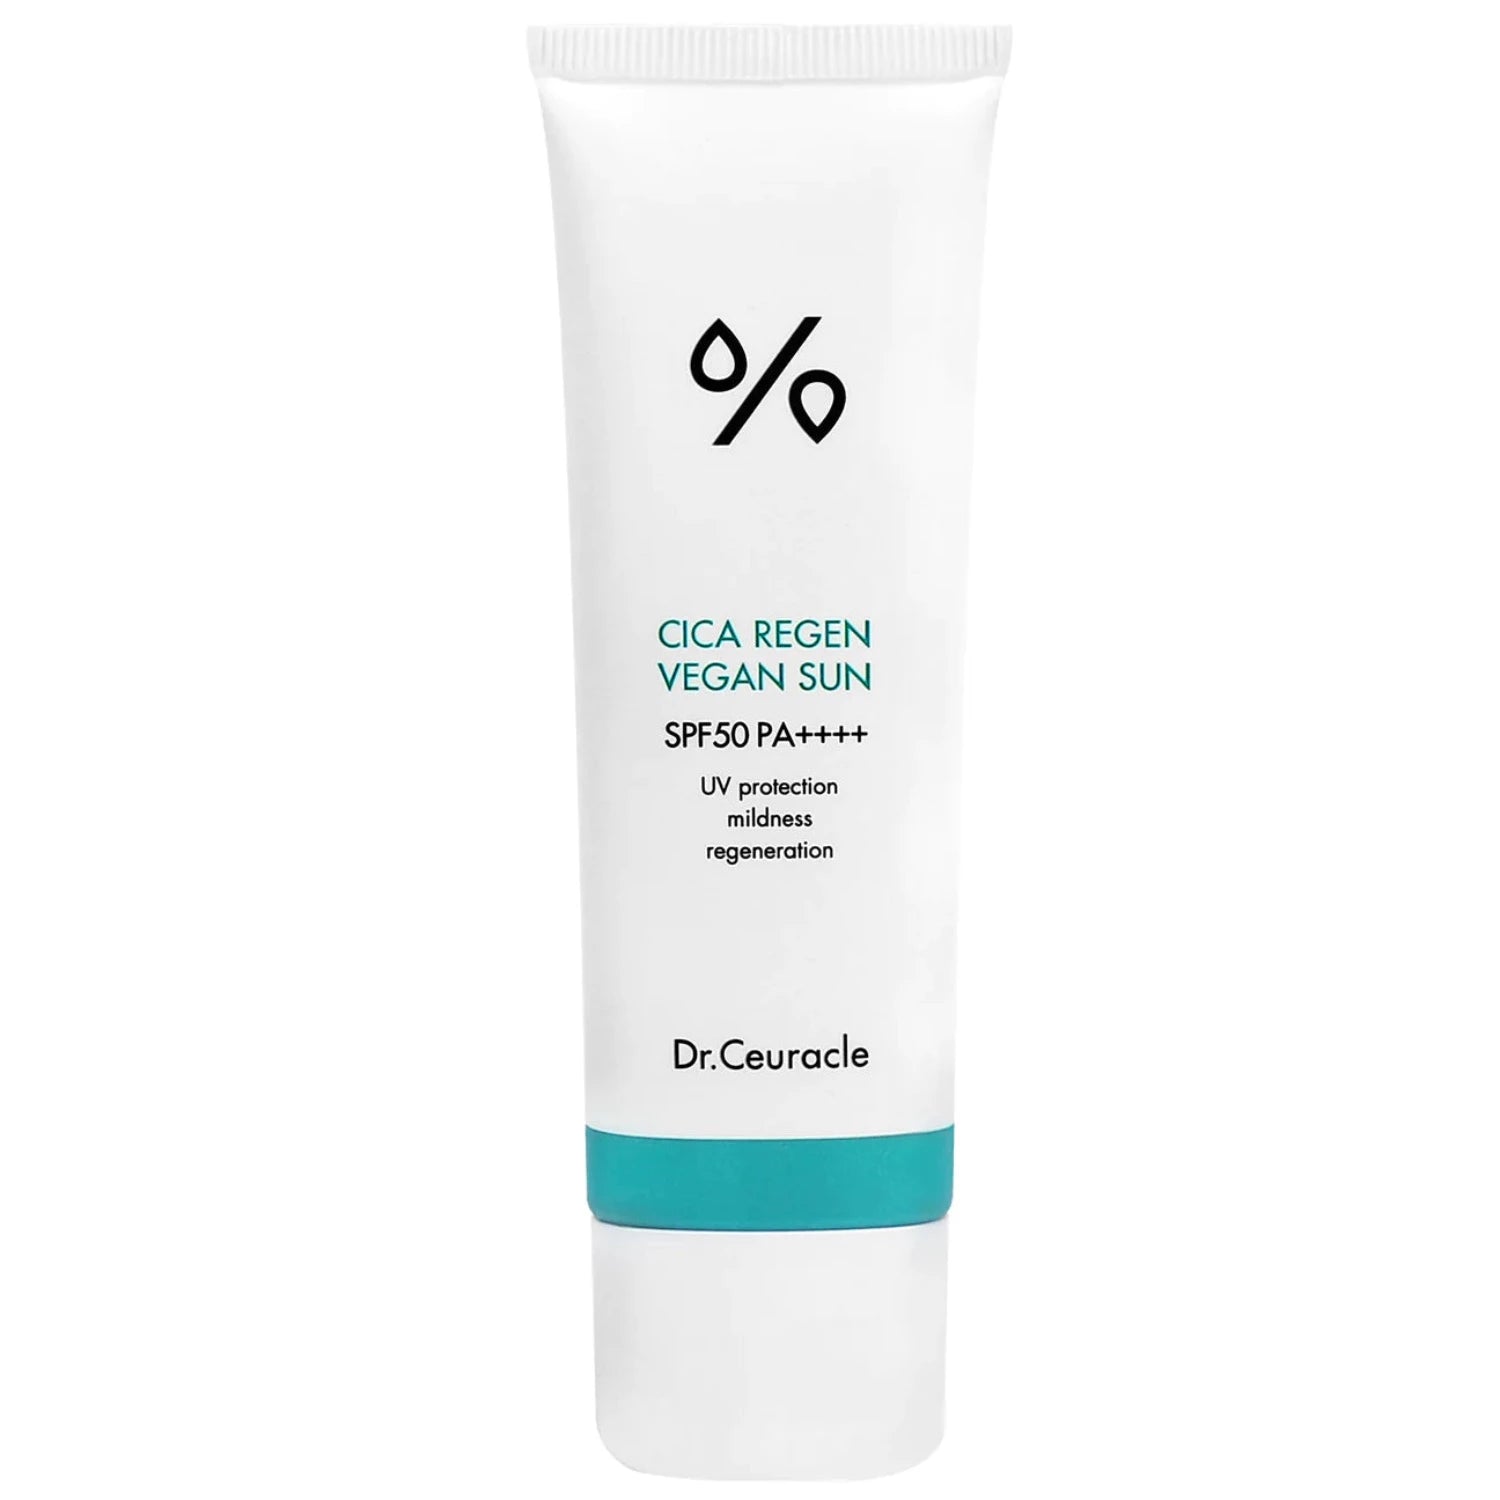 Dr. Ceuracle Cica Regen Vegan Sun SPF50 is an innovative formula to shield skin from dangerous UV damage and nourish for long-lasting hydration.